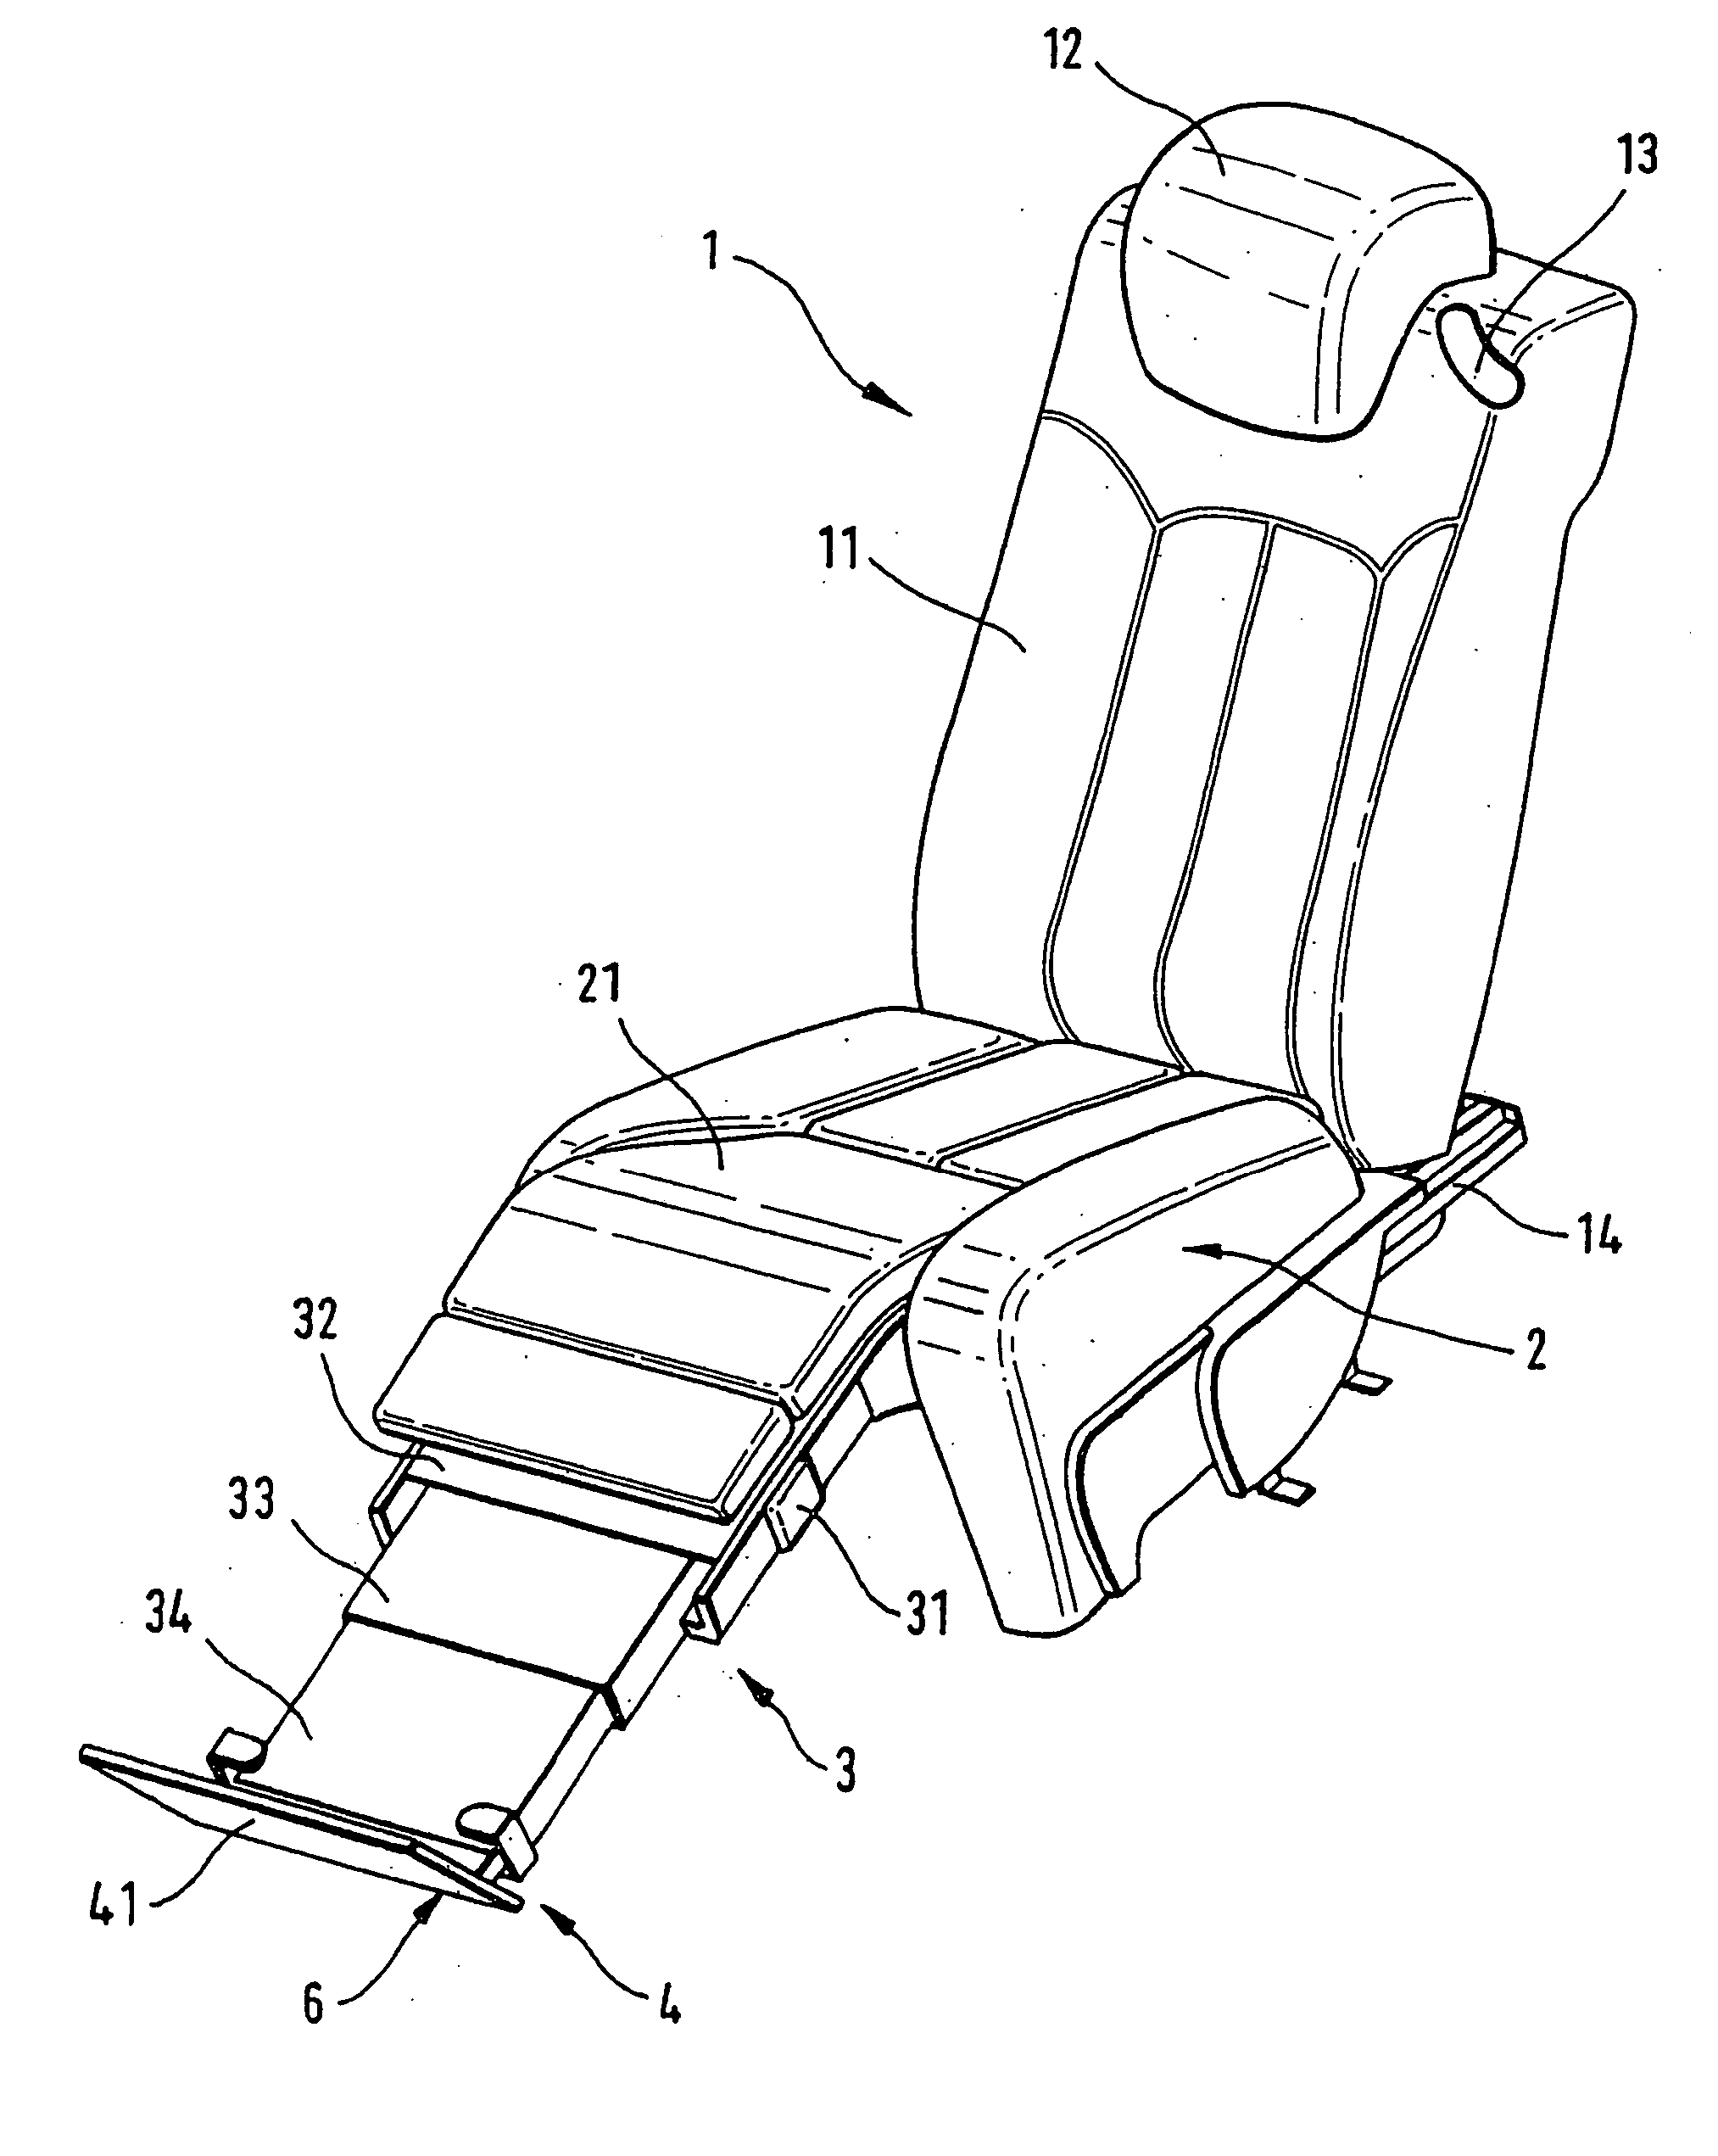 Vehicle seat with a support for the lower legs